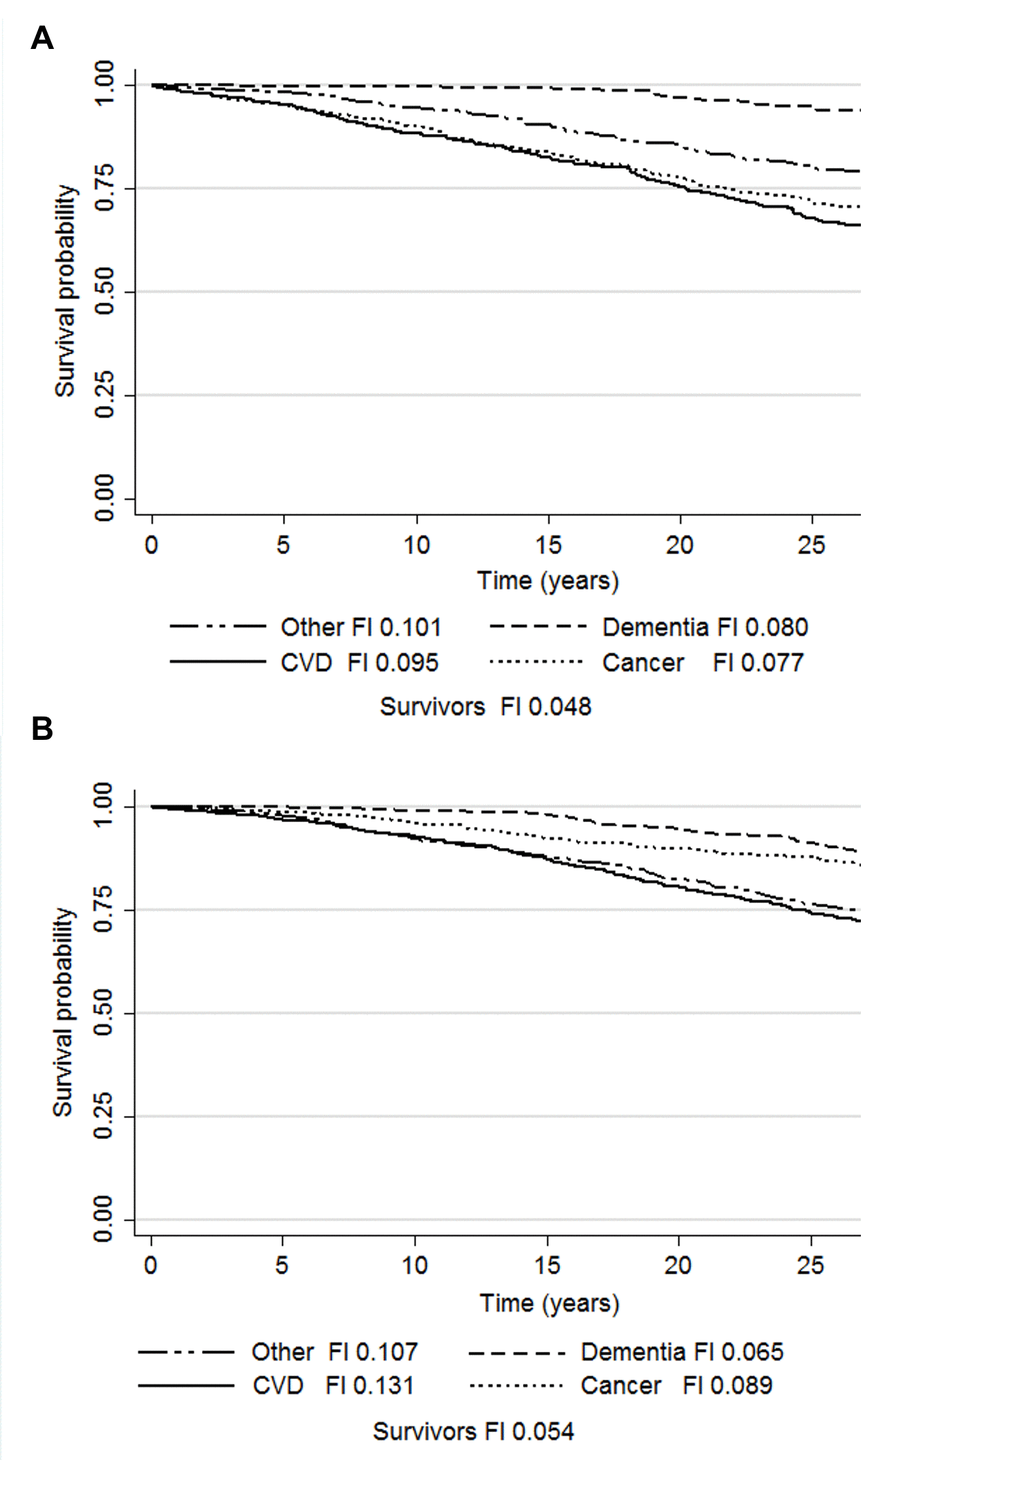 Kaplan-Meier survival probabilities and median frailty index levels according to the causes of death in men (a) and women (b). Abbreviations: CVD, cardiovascular disease; FI, frailty index.